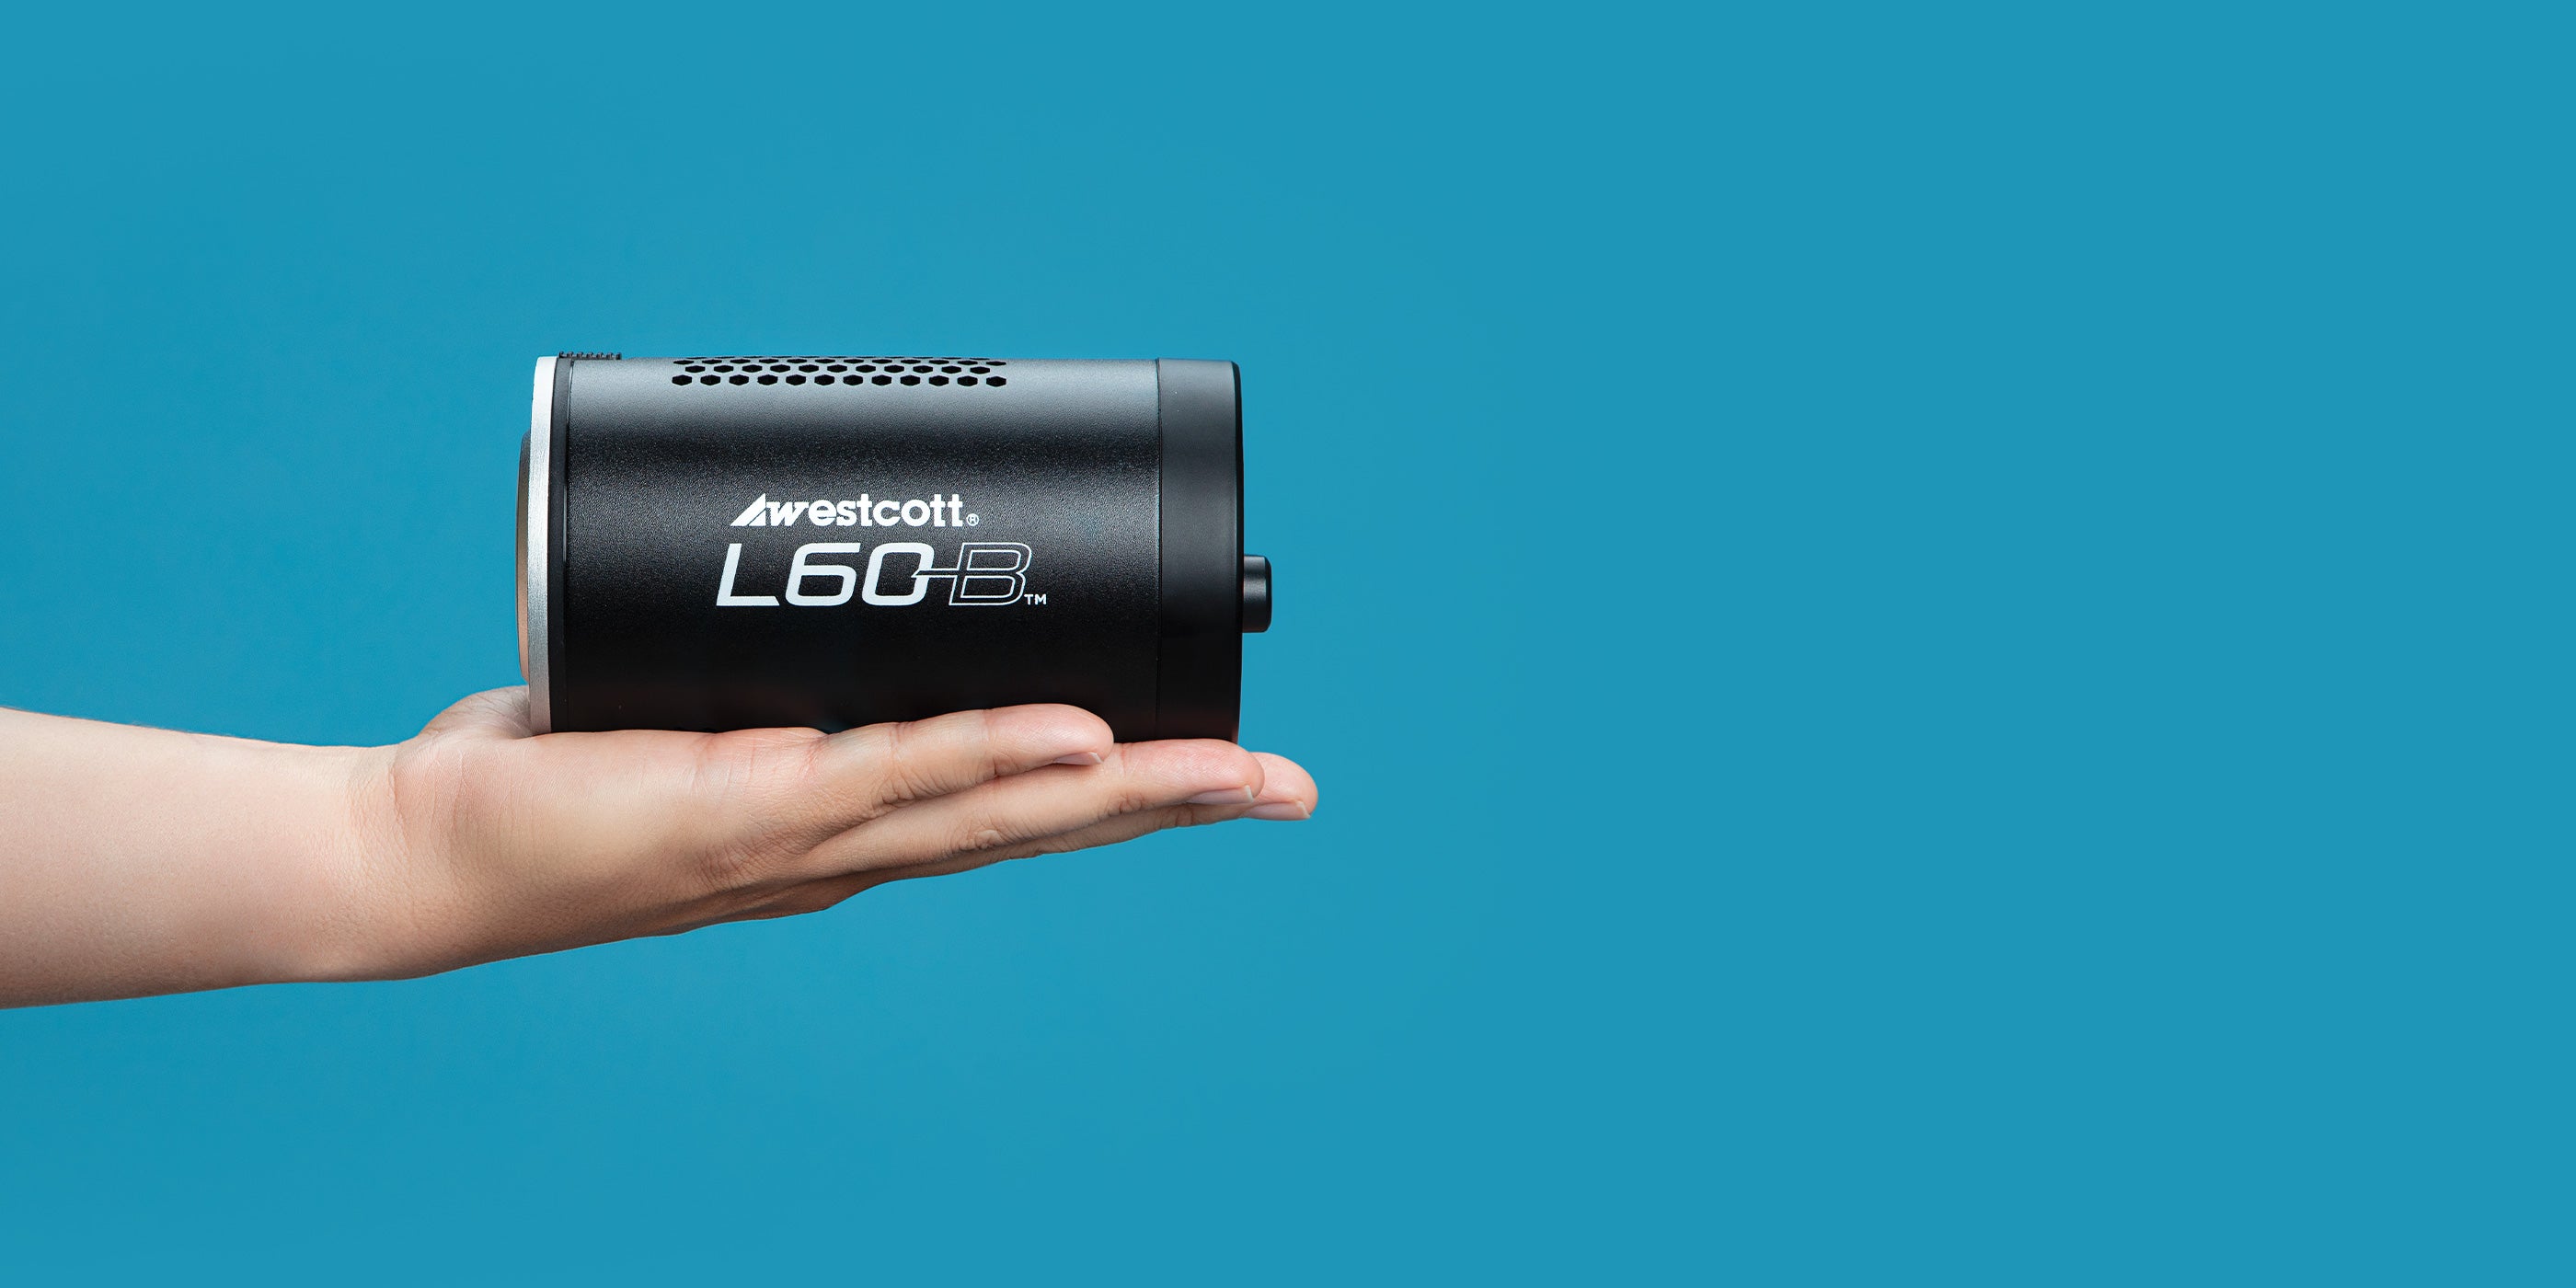 L60-B LED Size Relation Shown in Hand